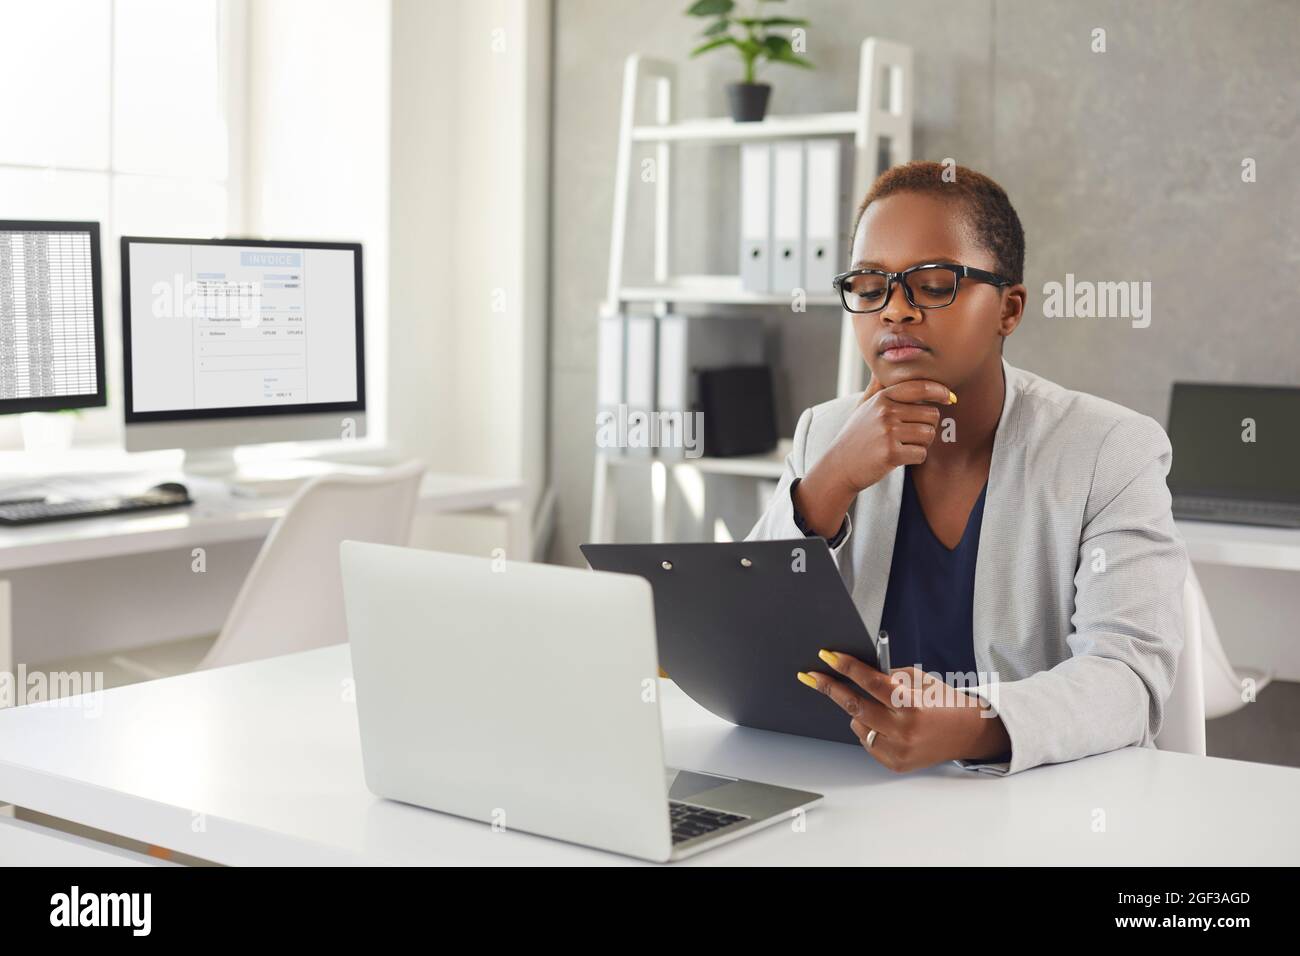 Black woman sitting at her desk in office, reading business documents and thinking Stock Photo